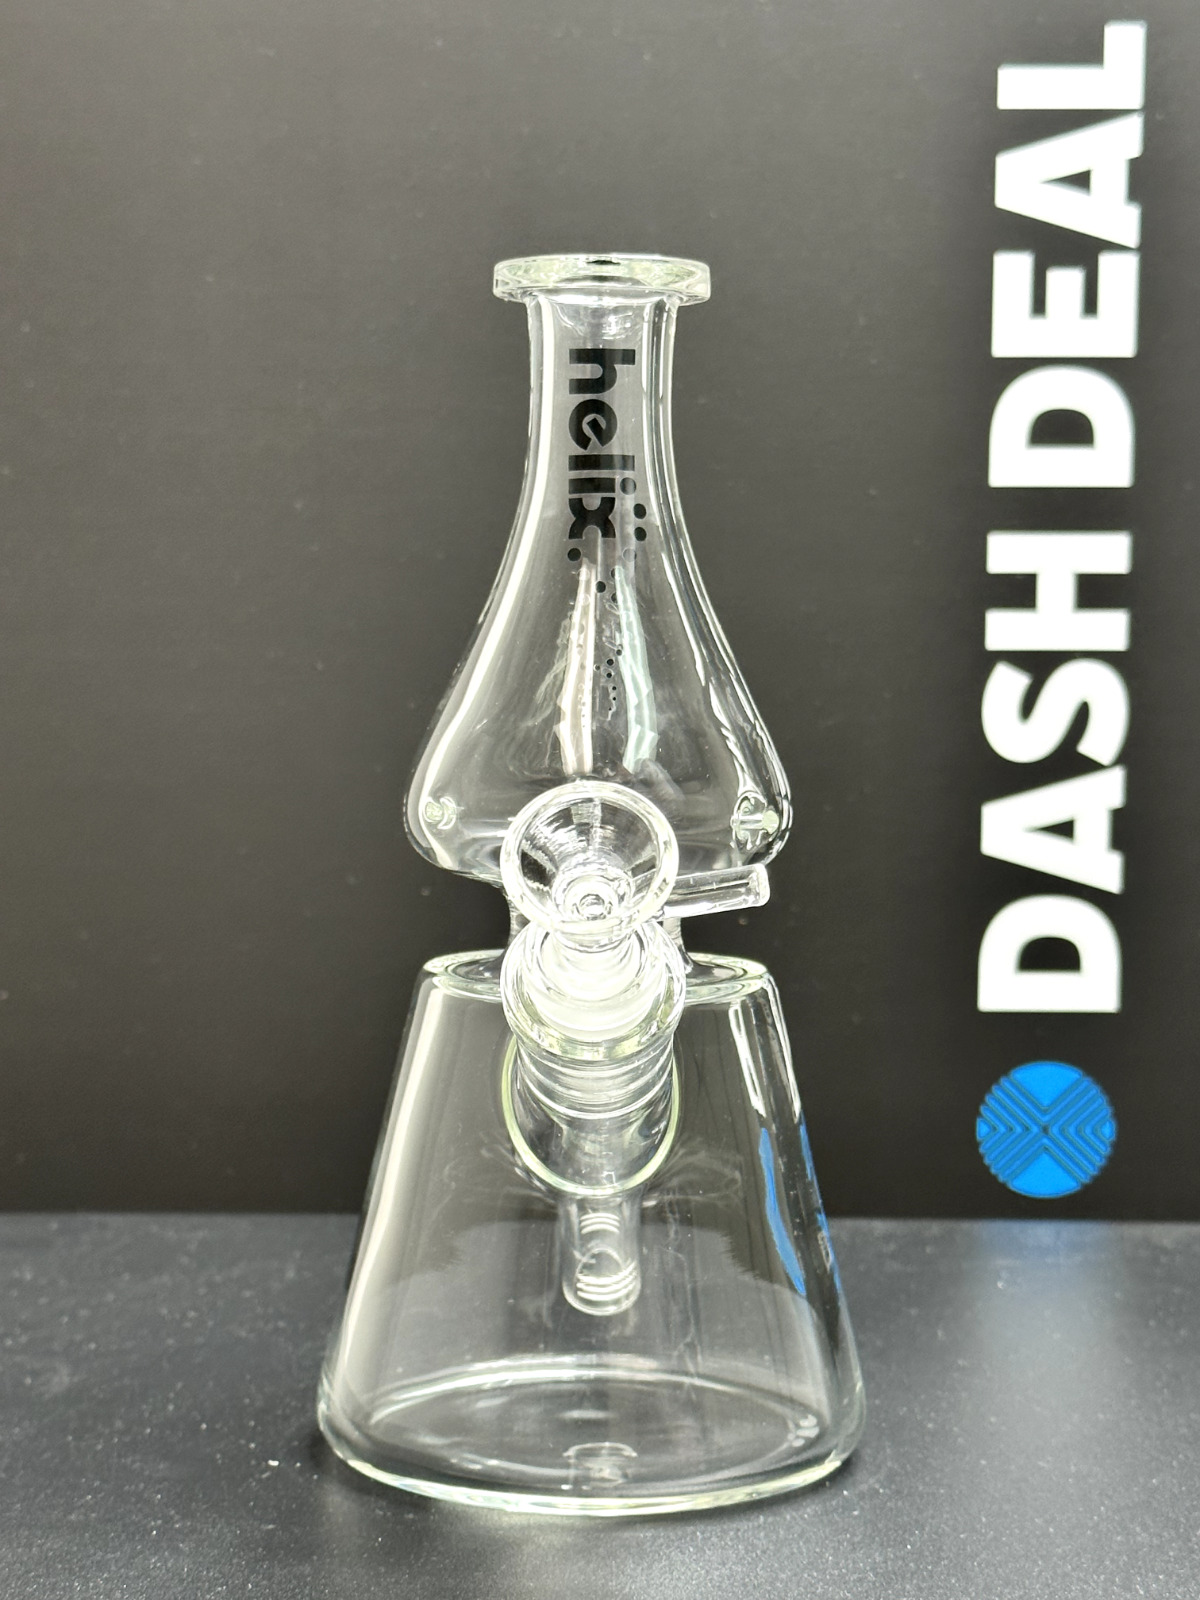 10 GRAV - Glass Water Pipe Bong - WHIRLWIND HELIX BEAKER - 14mm Bowl. Available Now for 69.99